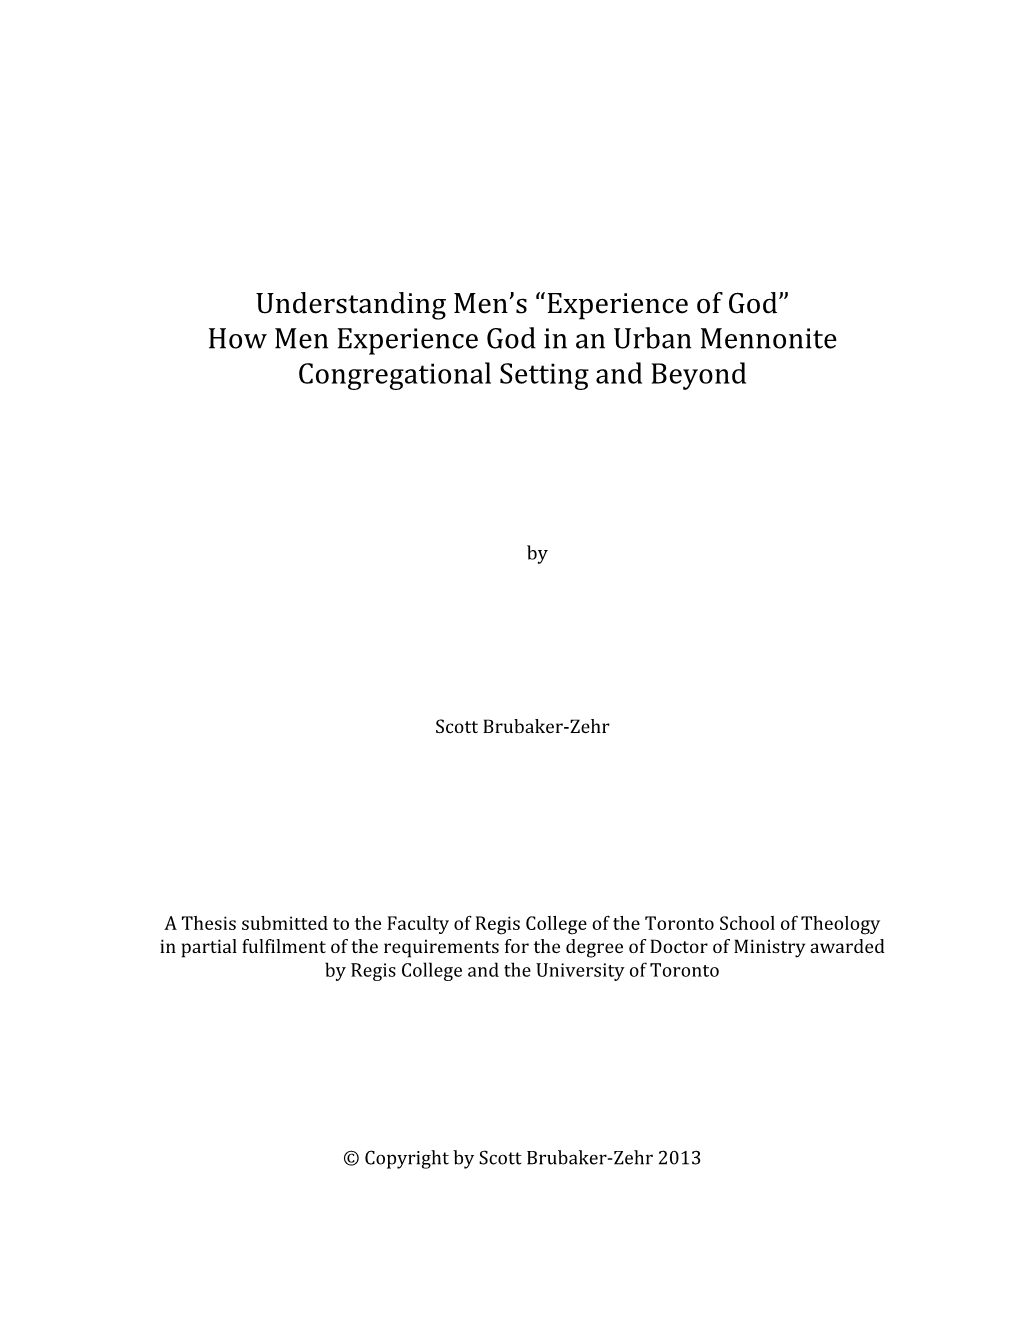 Experience of God” How Men Experience God in an Urban Mennonite Congregational Setting and Beyond